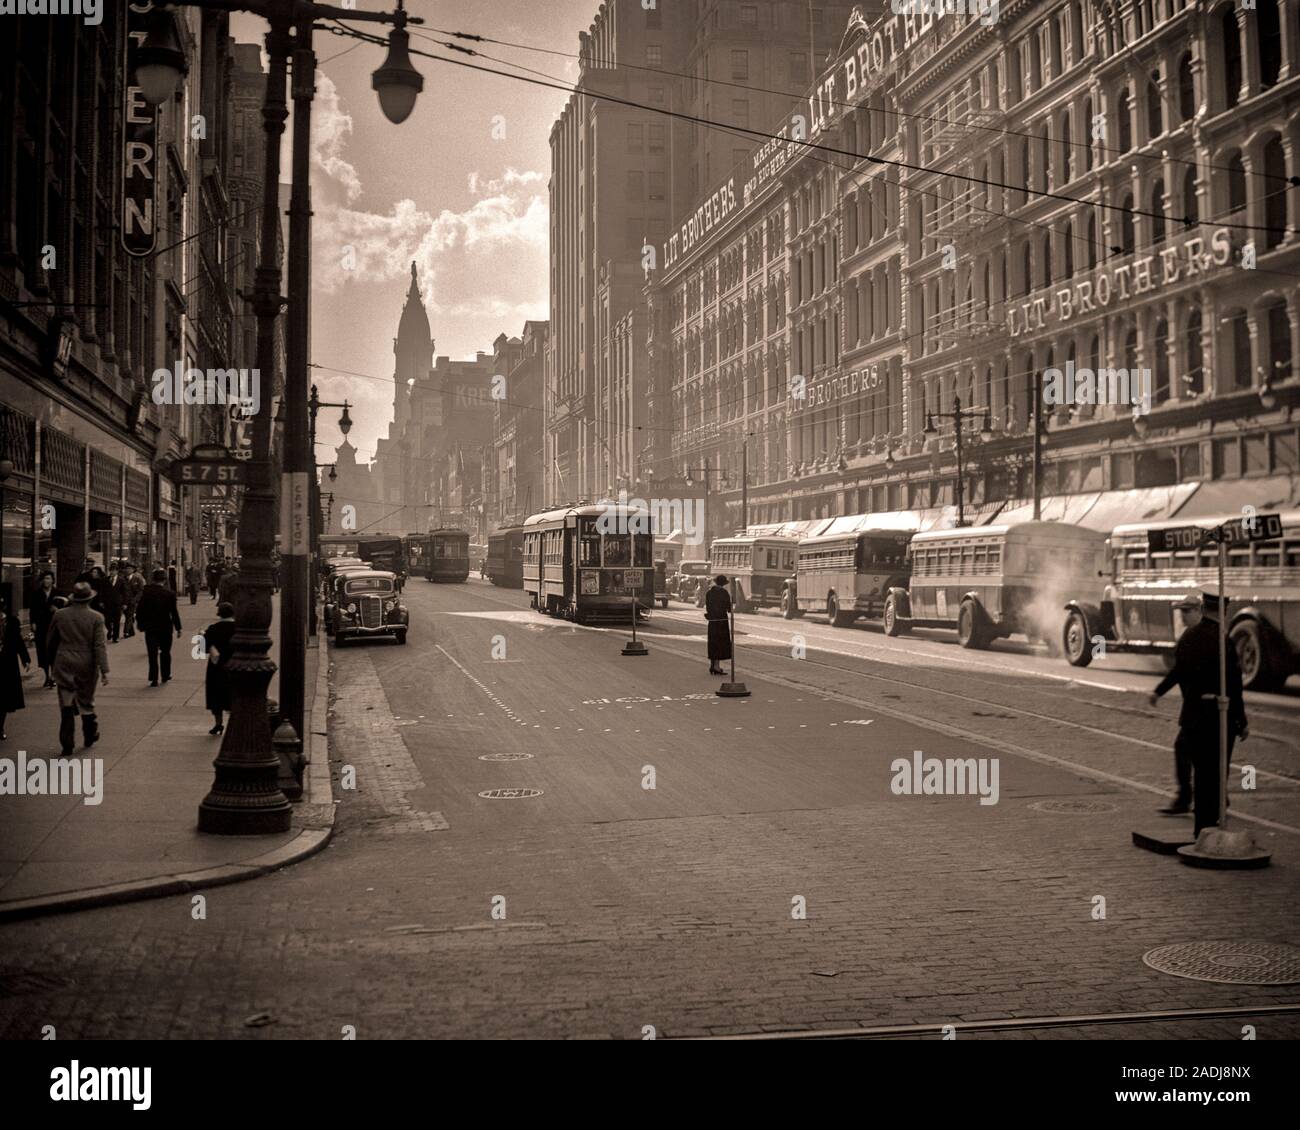 1930s LOOKING WEST MARKET STREET TO CITY HALL TROLLEY CARS TRAFFIC DEPARTMENT STORES  LIT BROTHERS BUILDINGS PHILADELPHIA PA USA - q41888 CPC001 HARS STORES TROLLEY REAL ESTATE STRUCTURES STYLISH EDIFICE BUSES LIT BROTHERS BLACK AND WHITE OLD FASHIONED Stock Photo